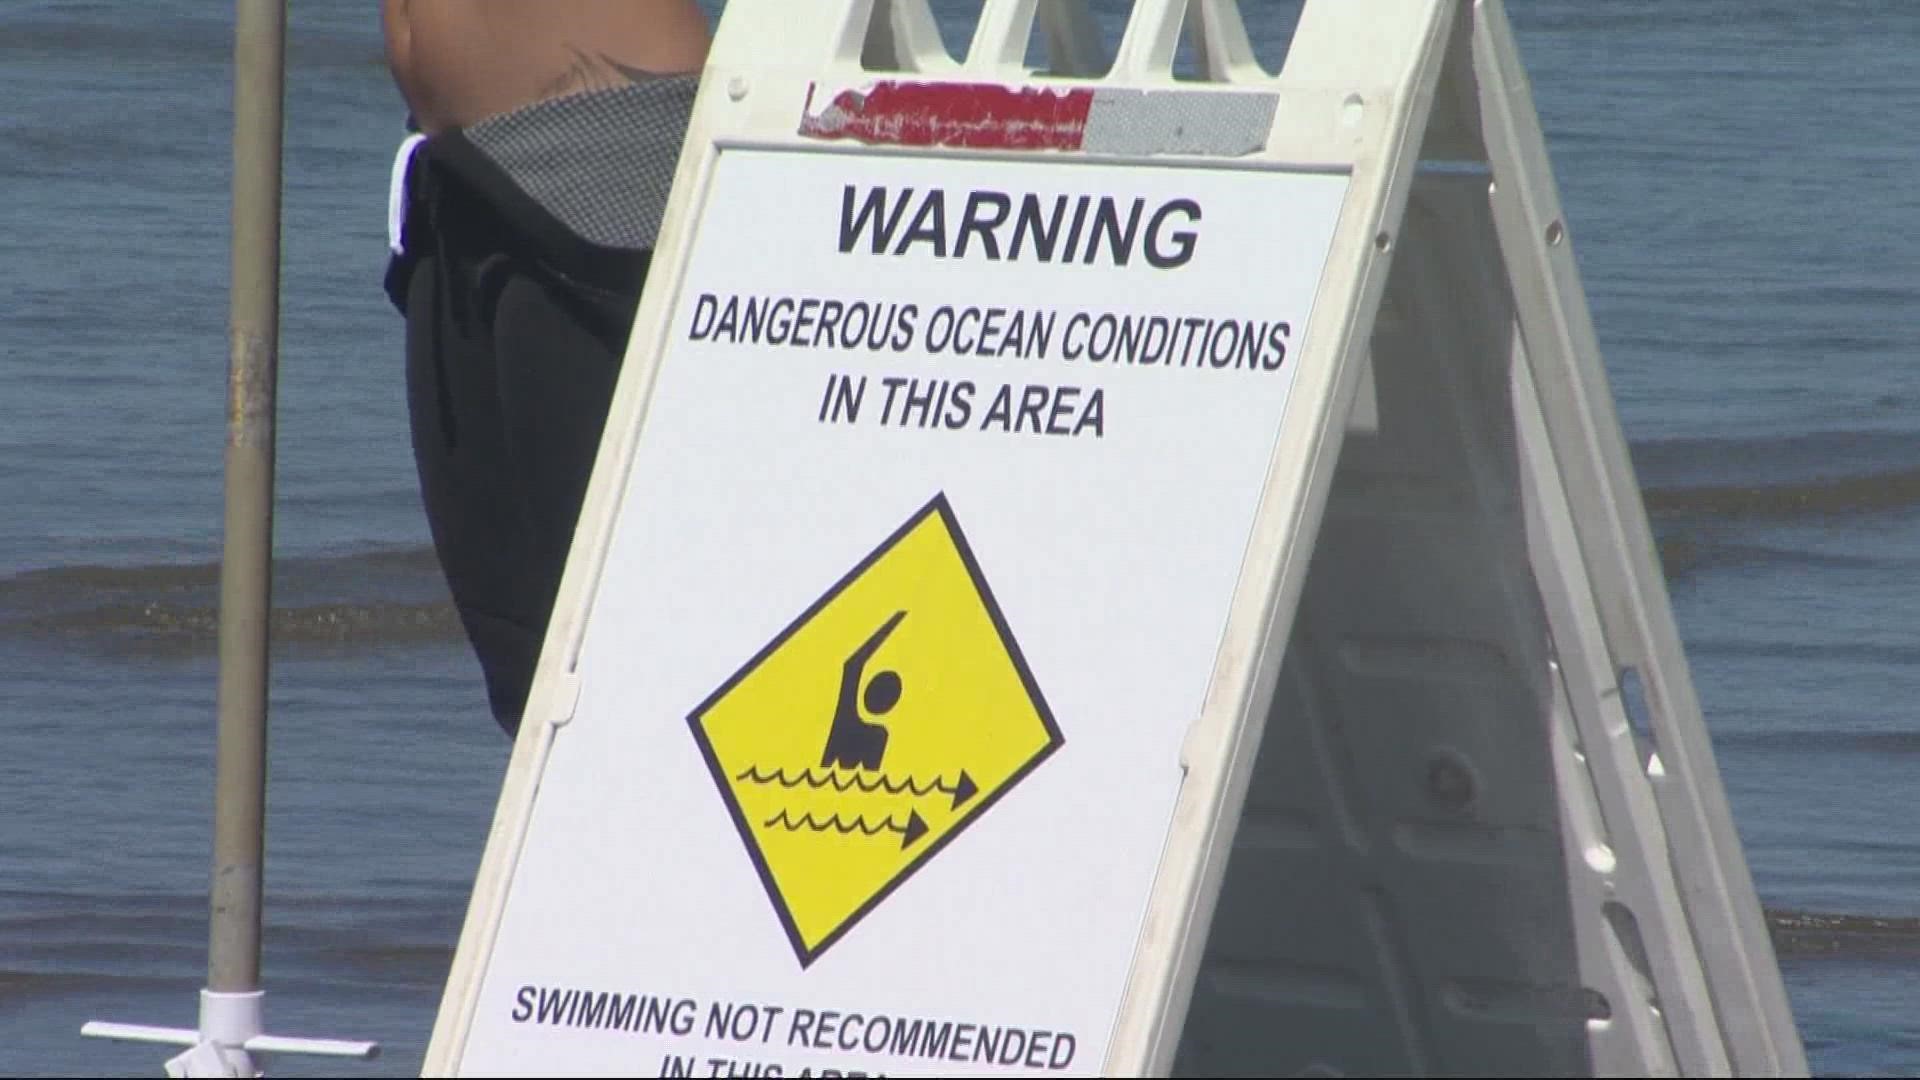 Multiple rip tides and other hazards put many swimmers in harm’s way. One man in his 50s died after being rescued.